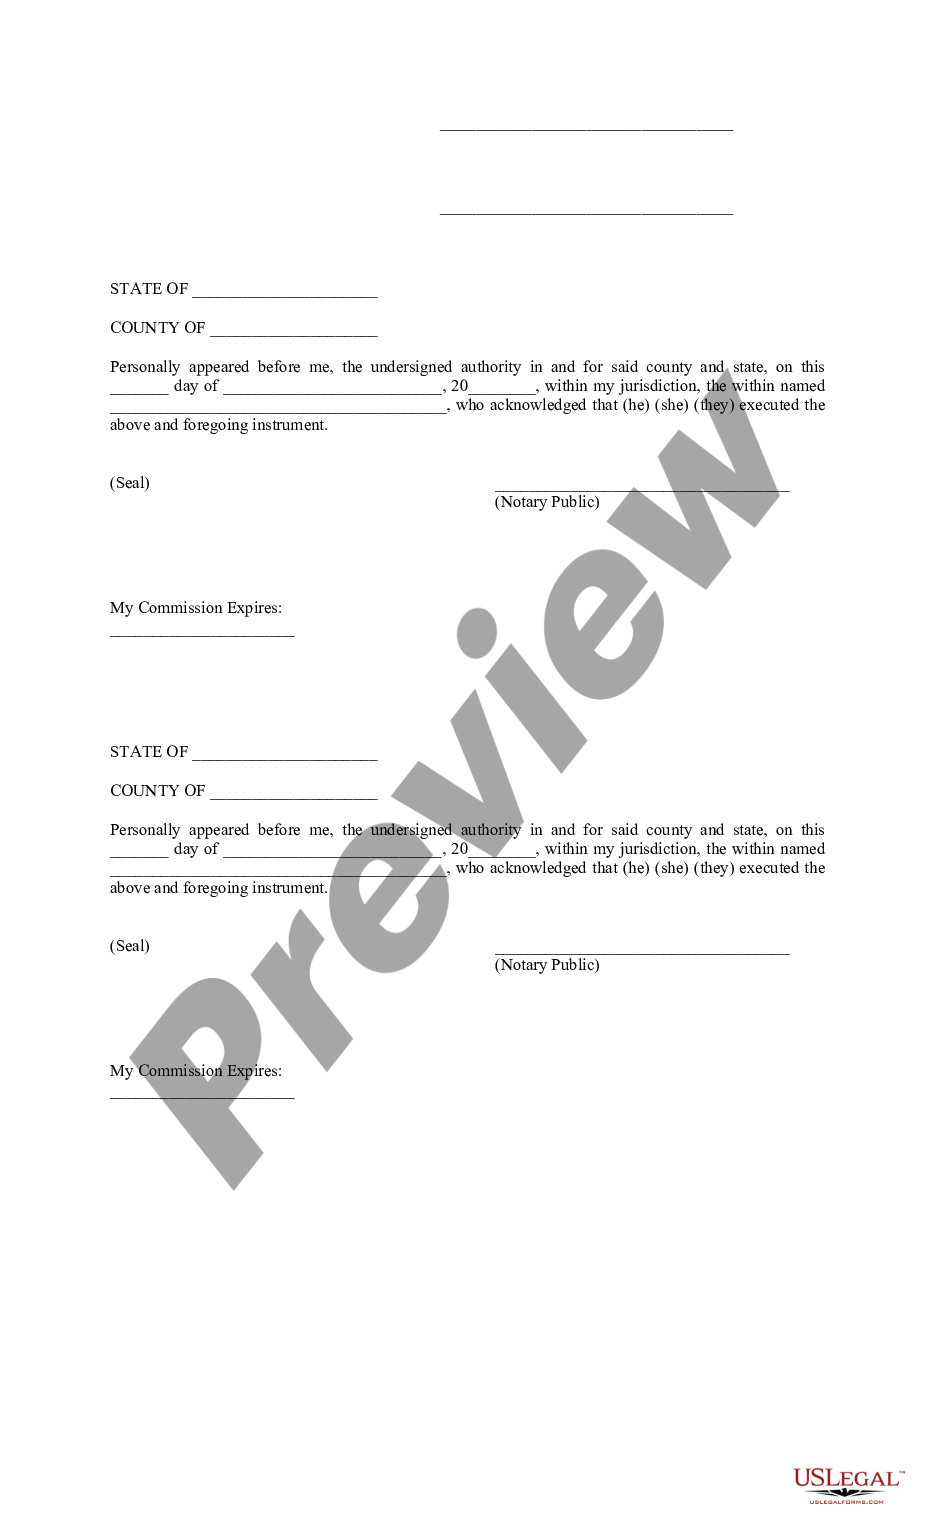 form Marital Domestic Separation and Property Settlement Agreement no children preview